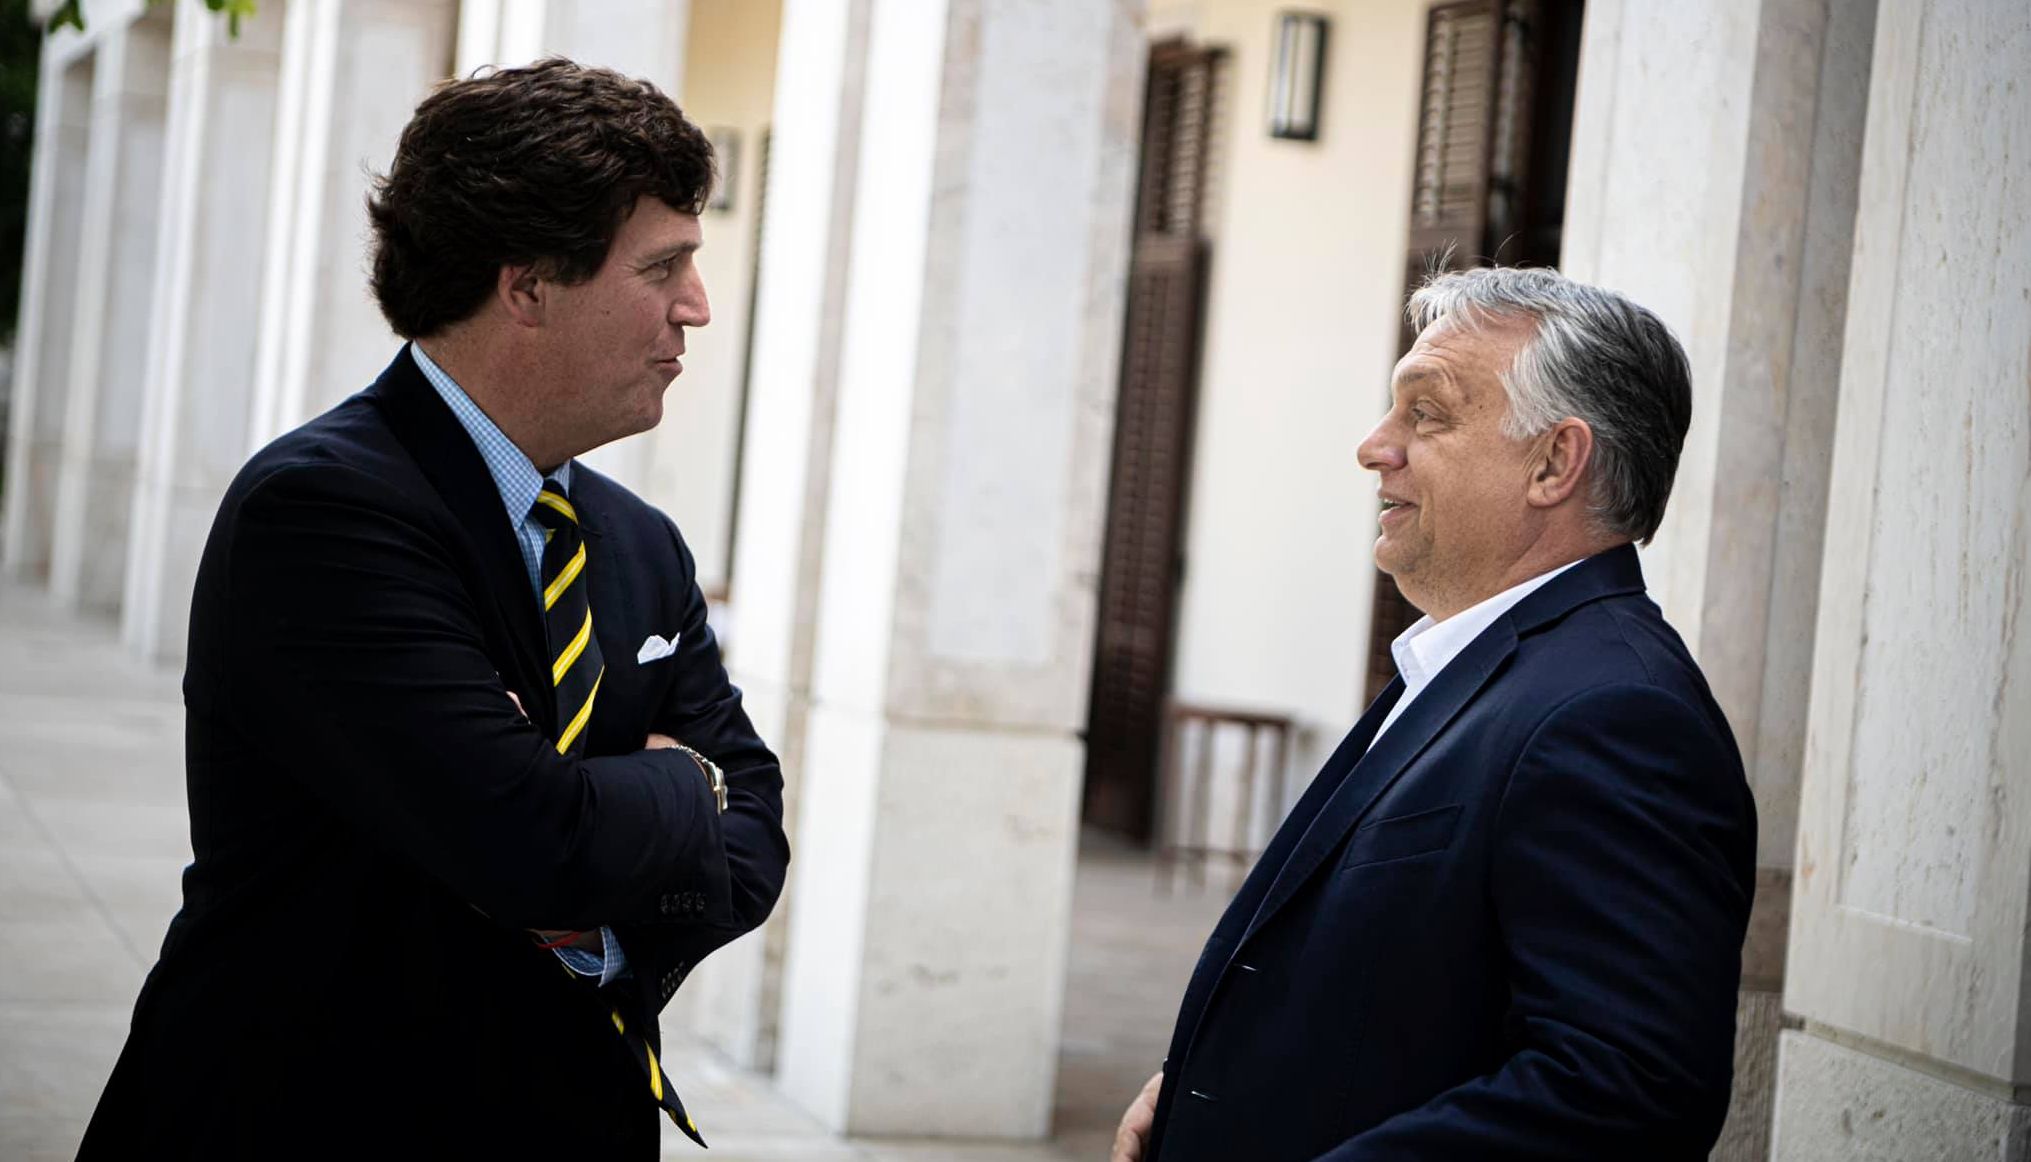 Press Roundup: Tucker Carlson’s Visit to Hungary and His Interview with PM Orbán